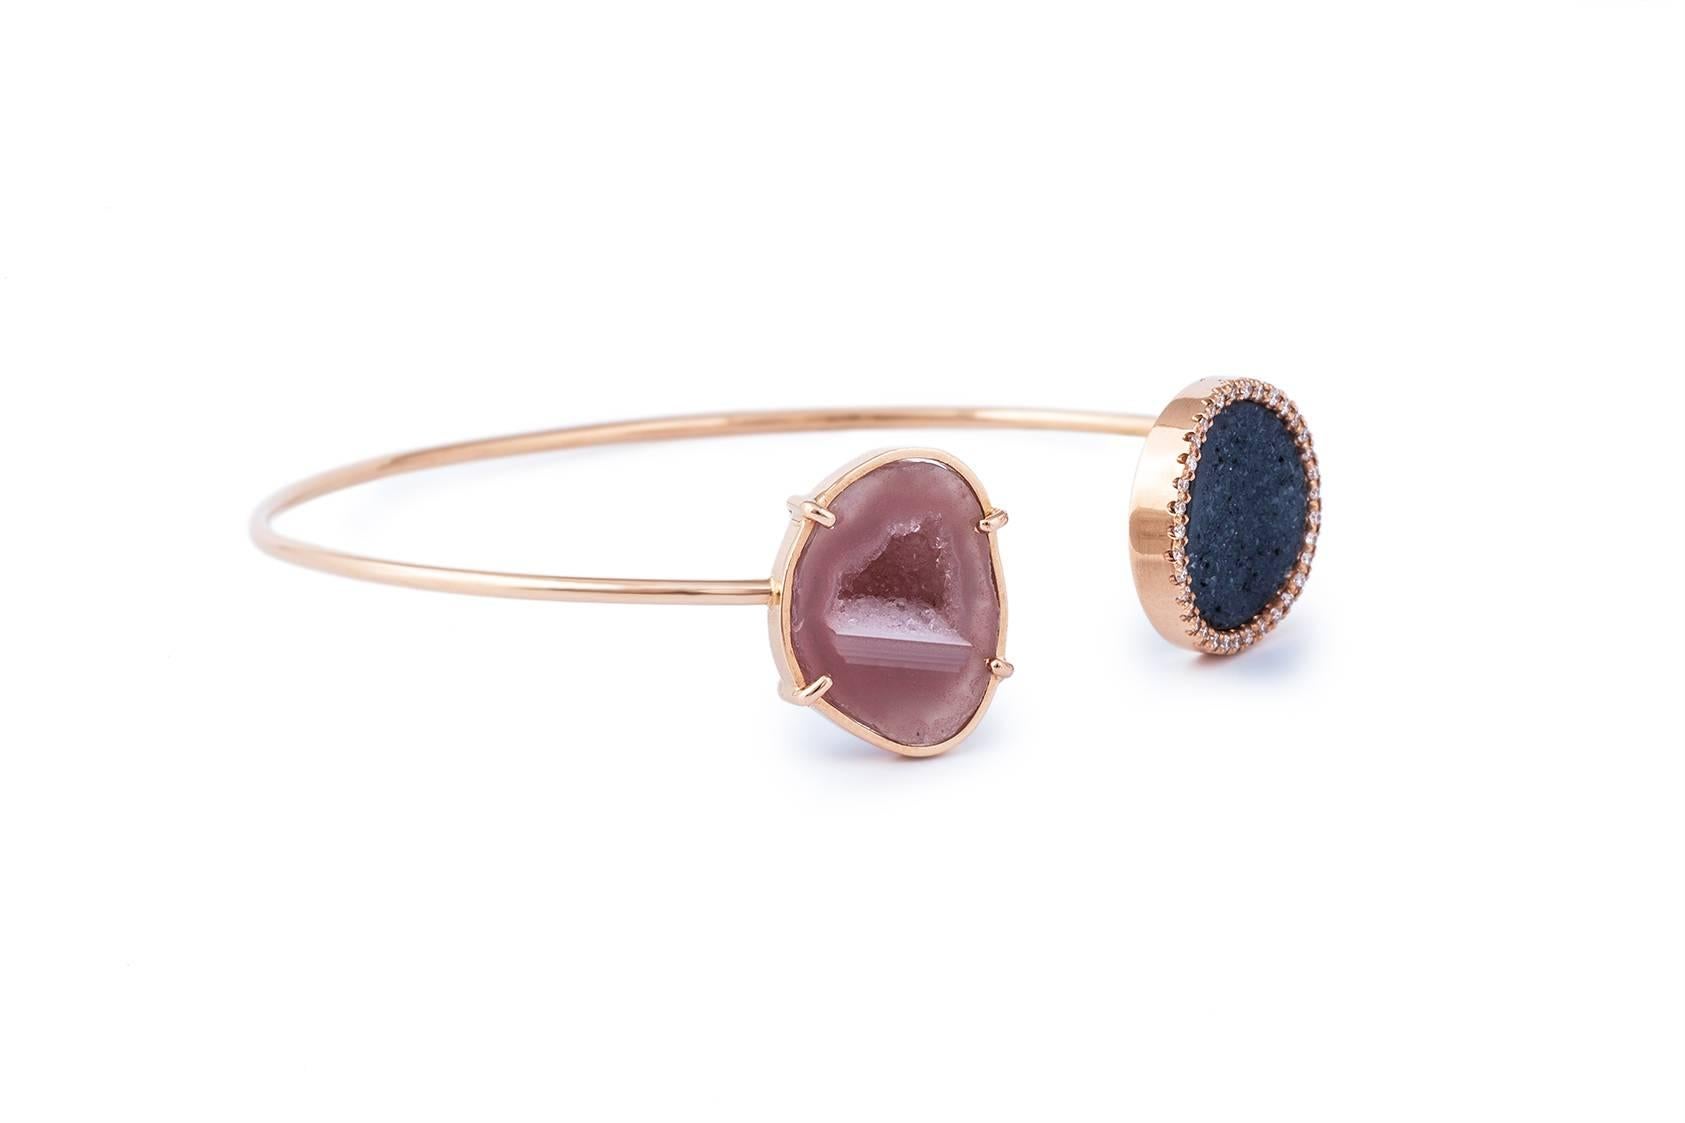 Delicate and strong, this bangle has it all.
The pink geode gives it a feminine touch, the druzy agate makes this bracelet so special.
Set in 18k ros gold and shimmering diamonds.
Wear it alone or stack it with other bracelets.